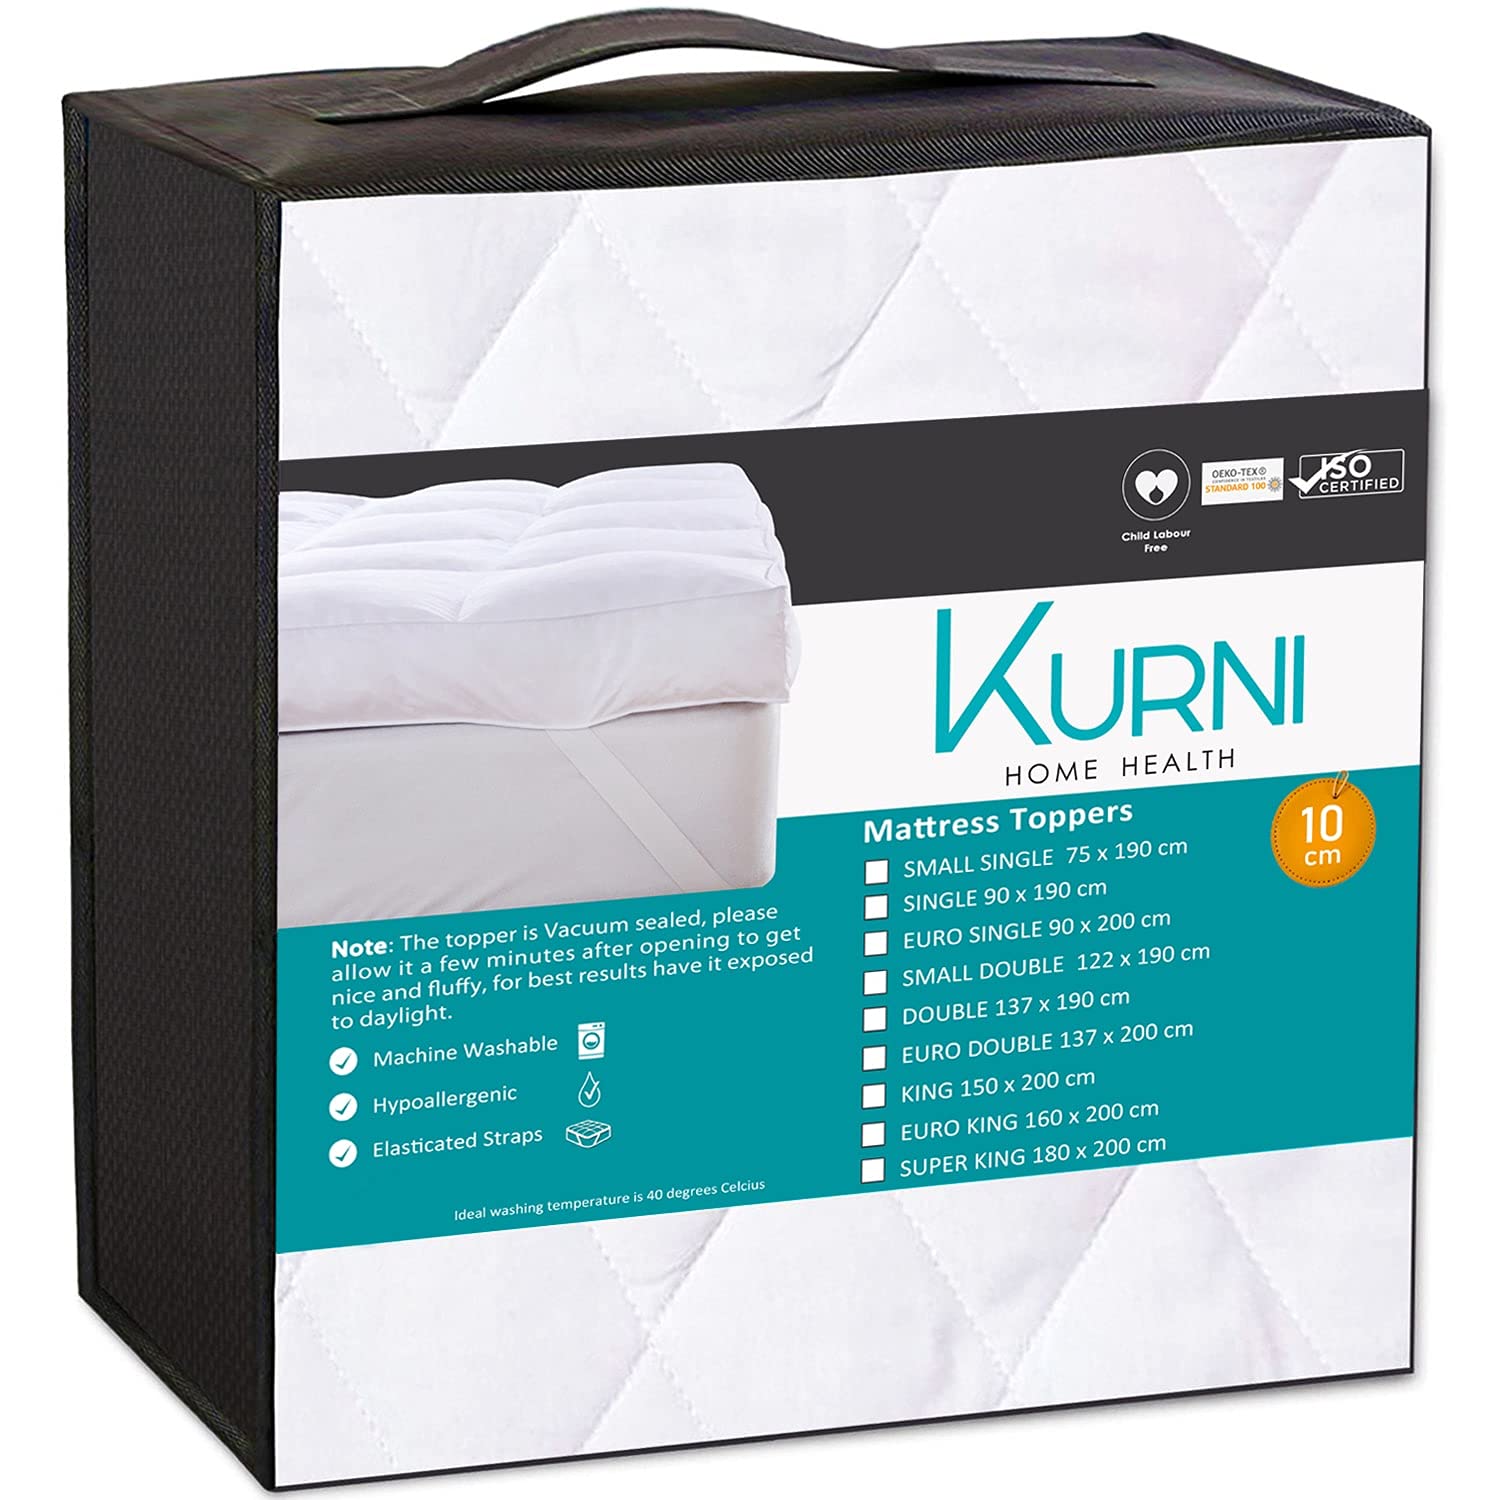 Kurni ® Mattress Topper Double Bed 4 Inch Thick White, Made with Fluffy Soft Microfiber Fabric, Machine Washable with Four Sided Deep Elasticized Corner Straps Size - (Double - 137x190 cm)